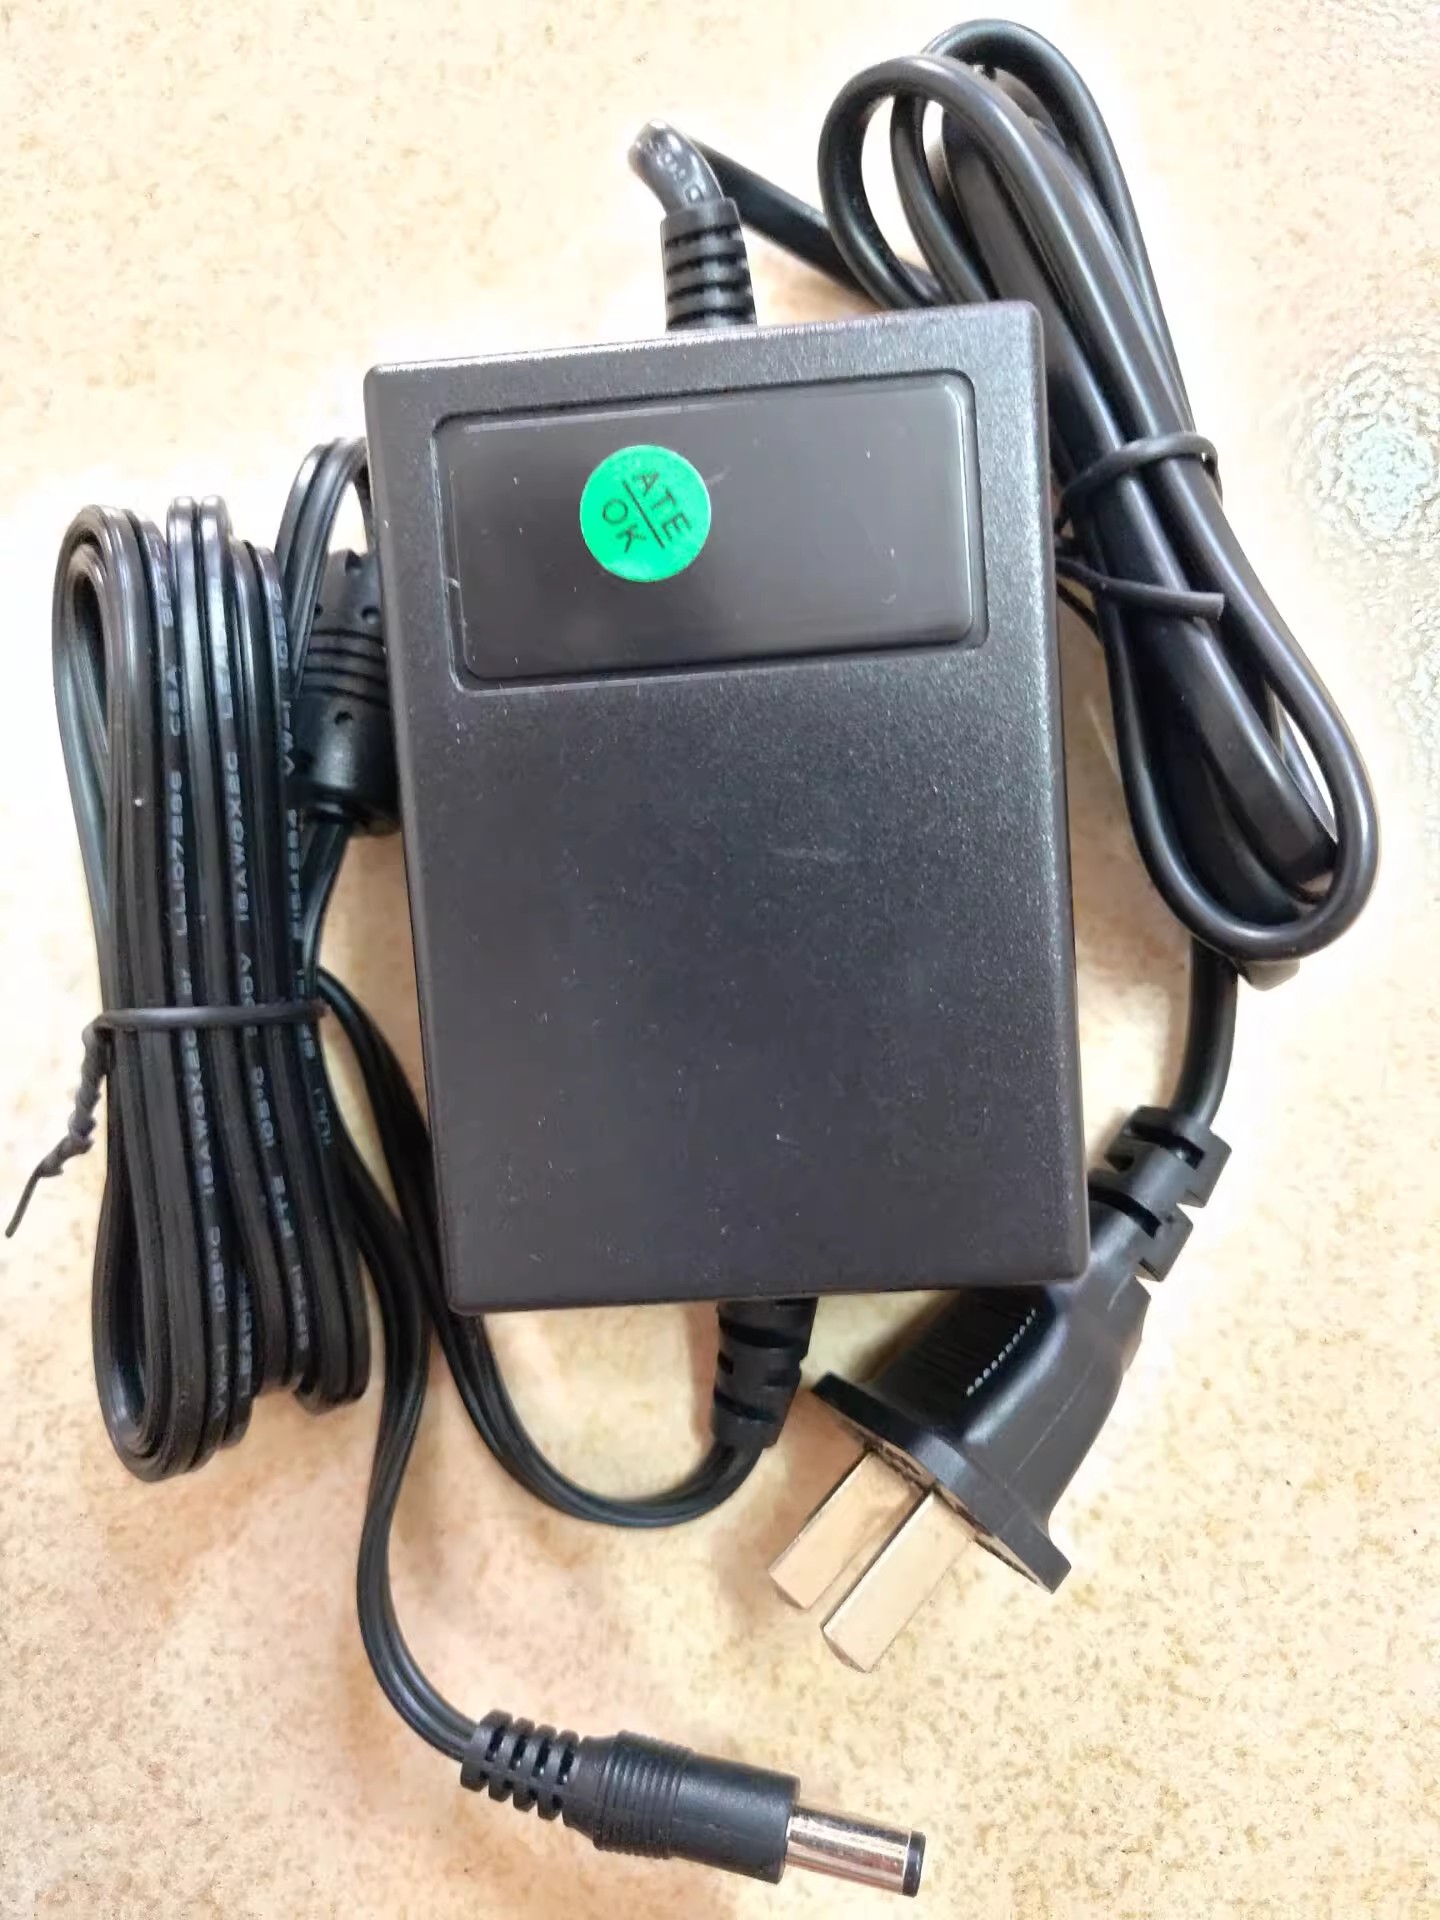 *Brand NEW* 12V 1.5A（1500MA）AC DC ADAPTHE KW200-7 POWER Supply